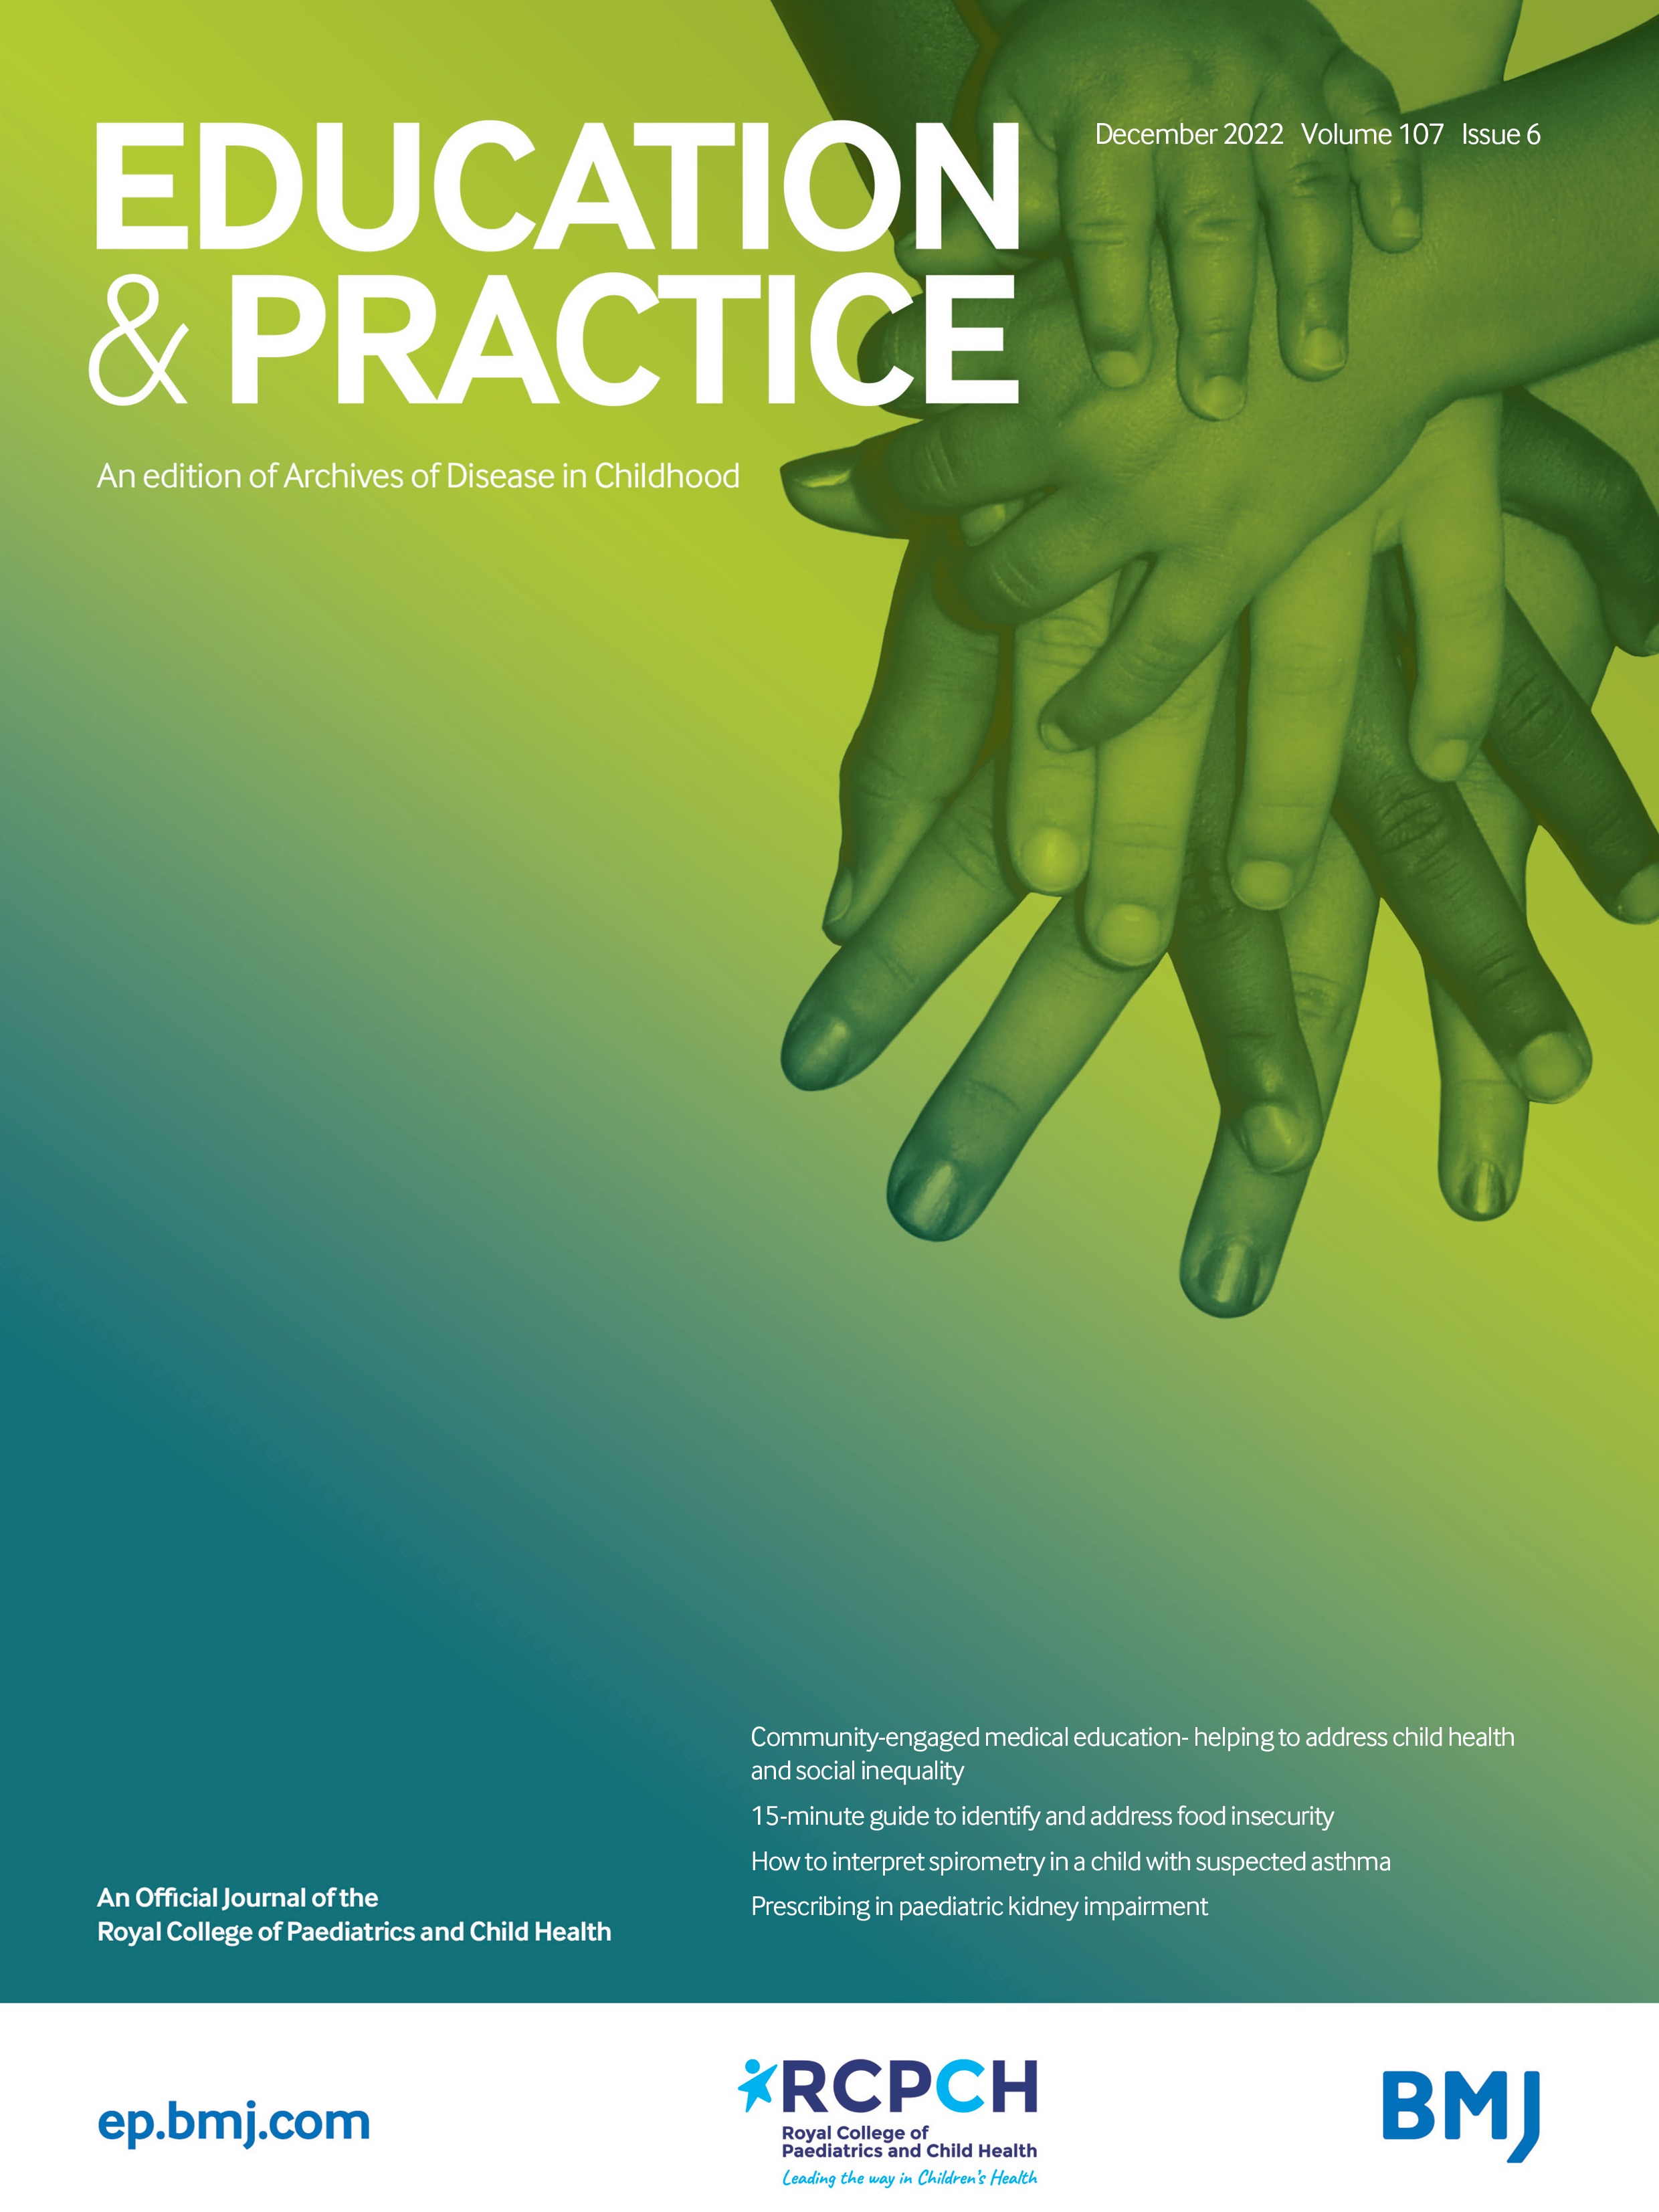 Guideline review - human and animal bites: antimicrobial prescribing